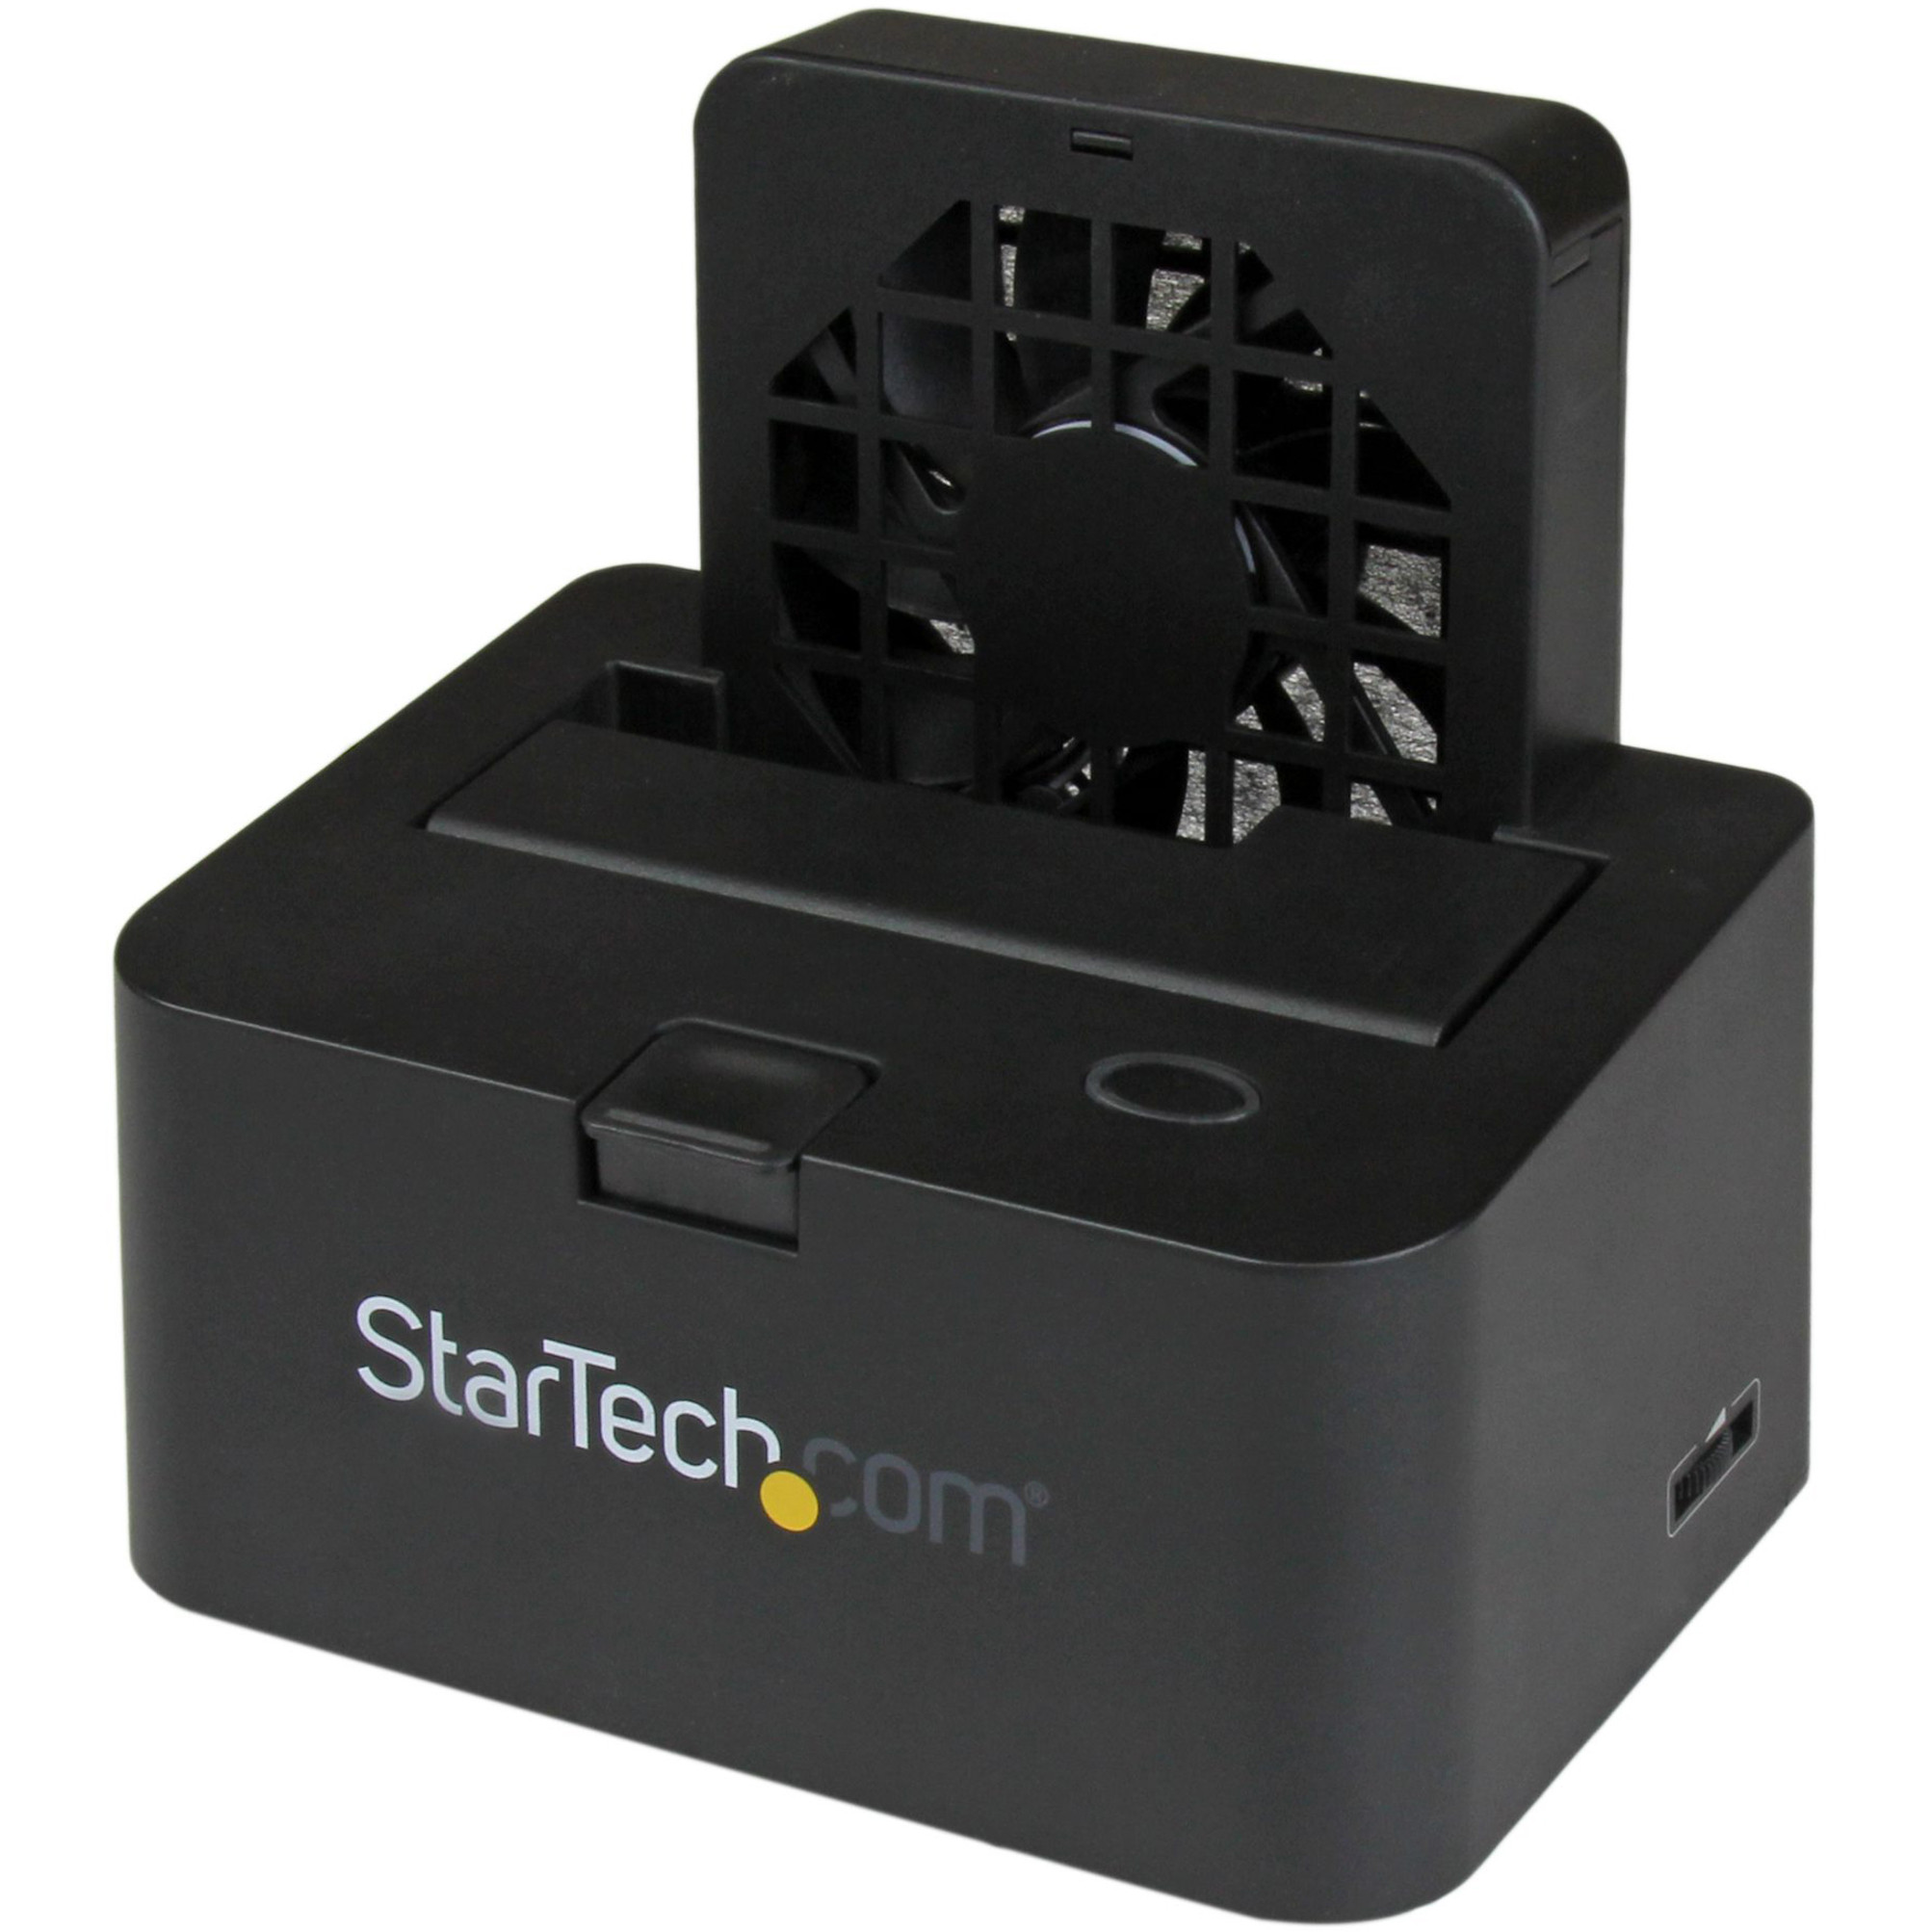 Startech .com External docking station for 2.5in or 3.5in SATA III hard driveseSATA or USB 3.0 with UASPEasily connect and swap hard dri… SDOCKU33EF